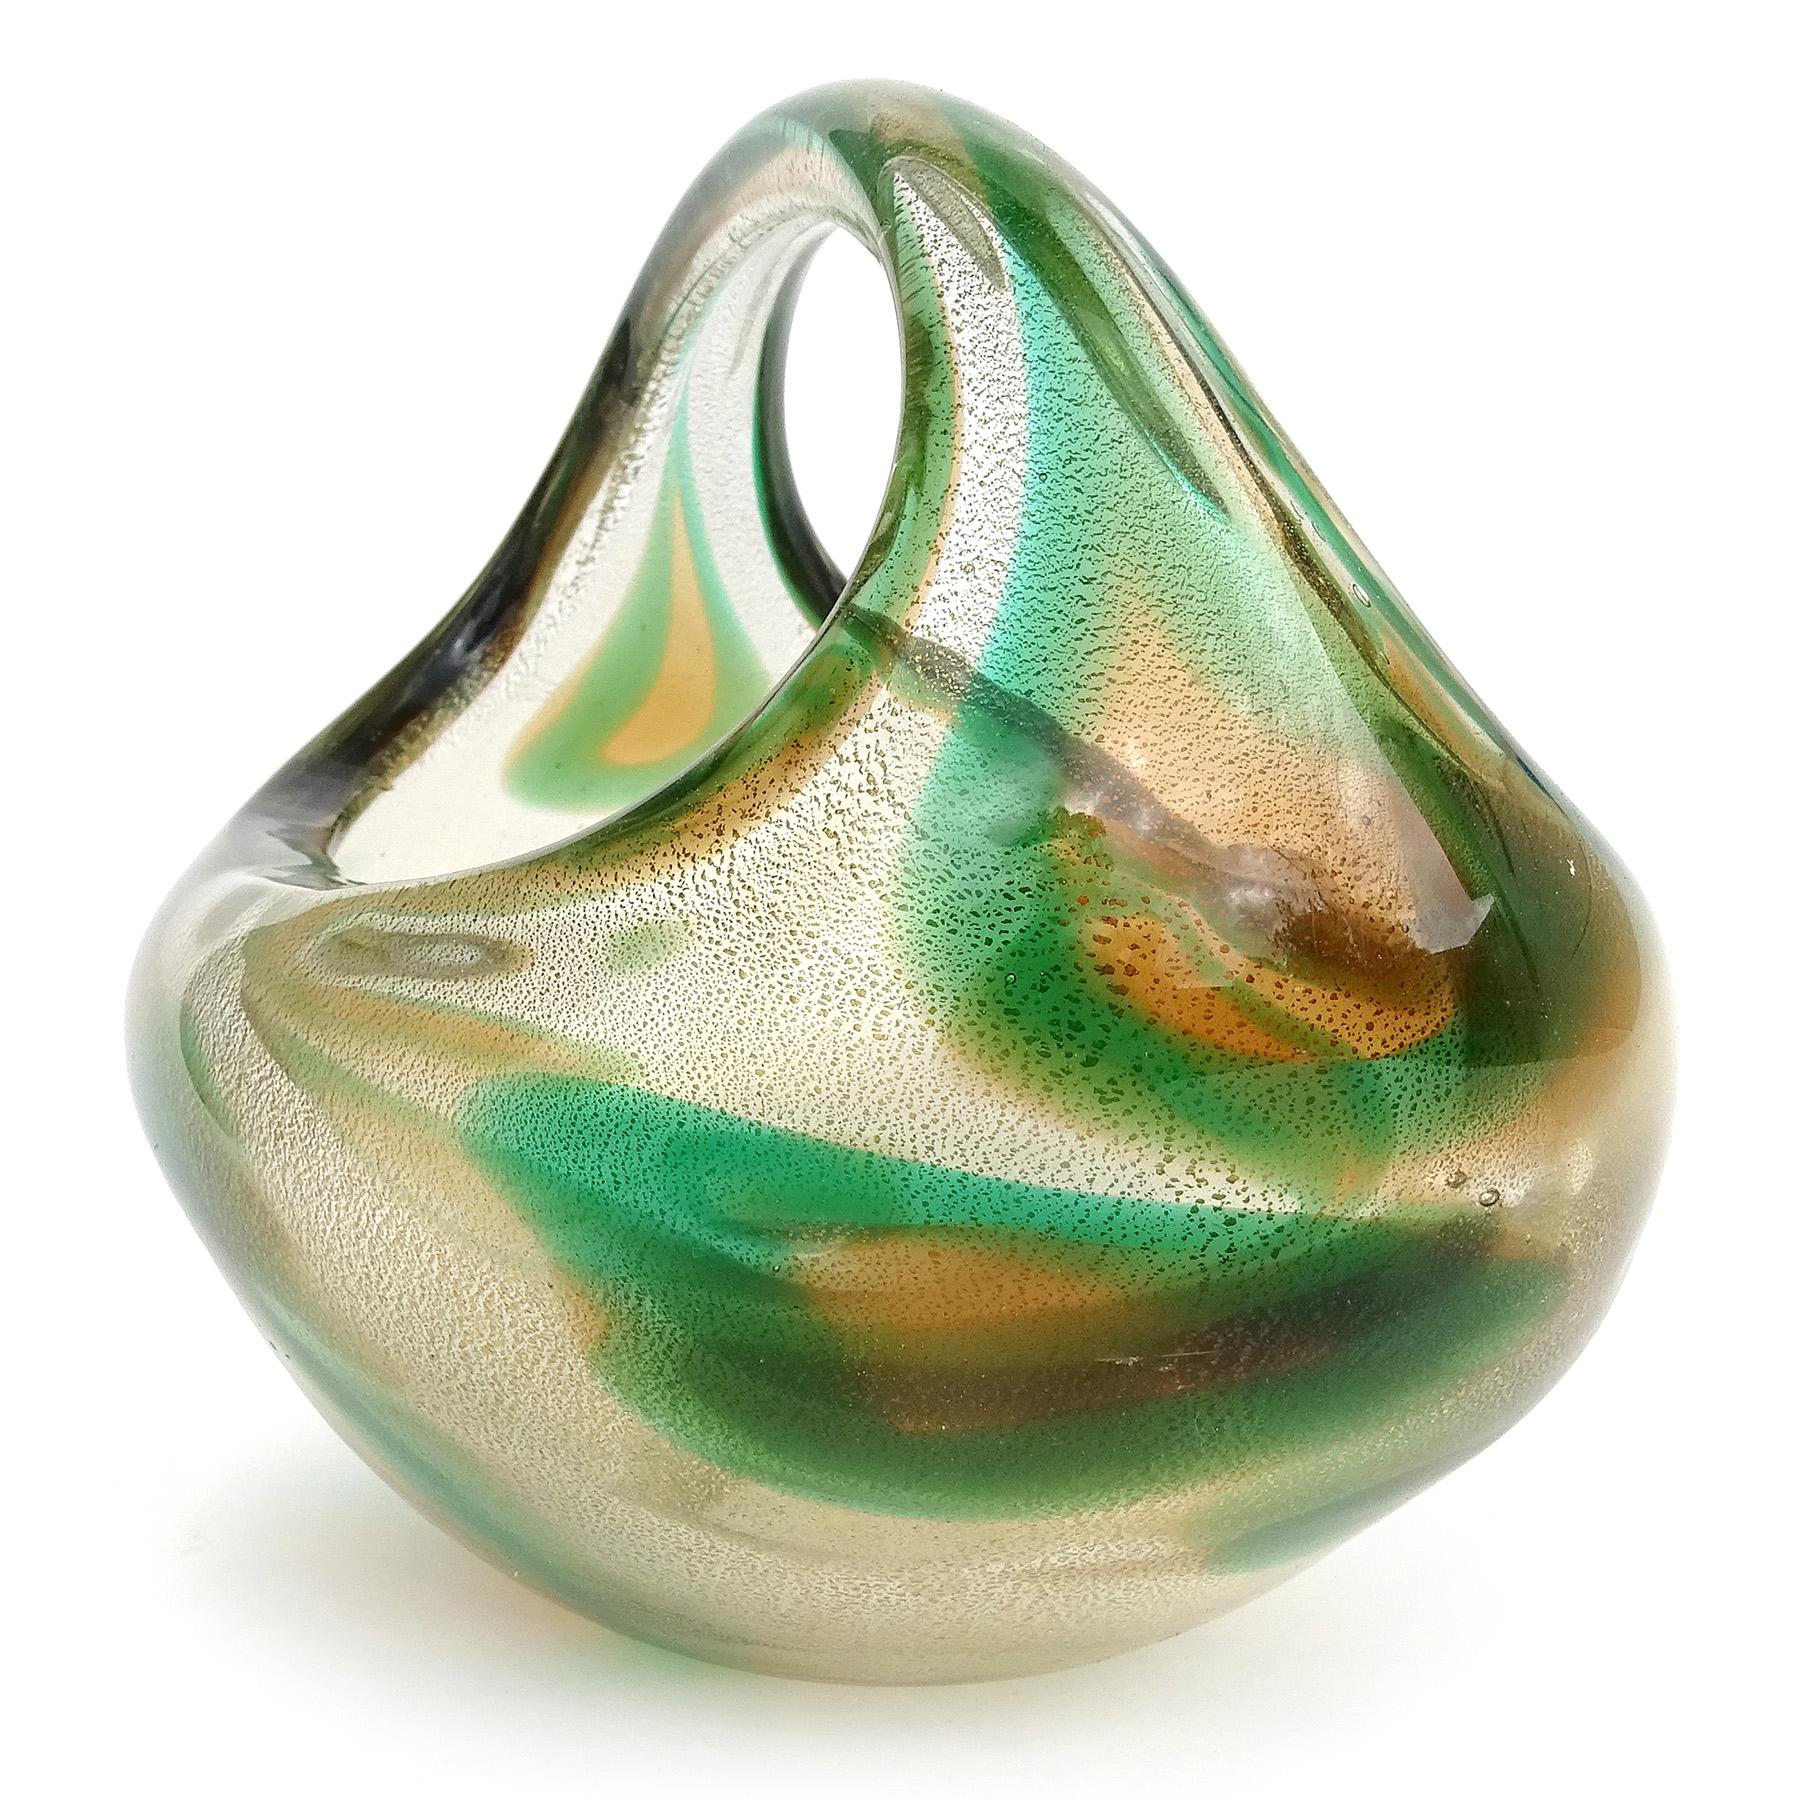 Beautiful vintage Murano hand blown Sommerso green, orange amber spots and gold flecks Italian art glass basket / vase. Documented to designer Archimede Seguso, circa 1952. Published design in many books. It has a camouflage design, profusely